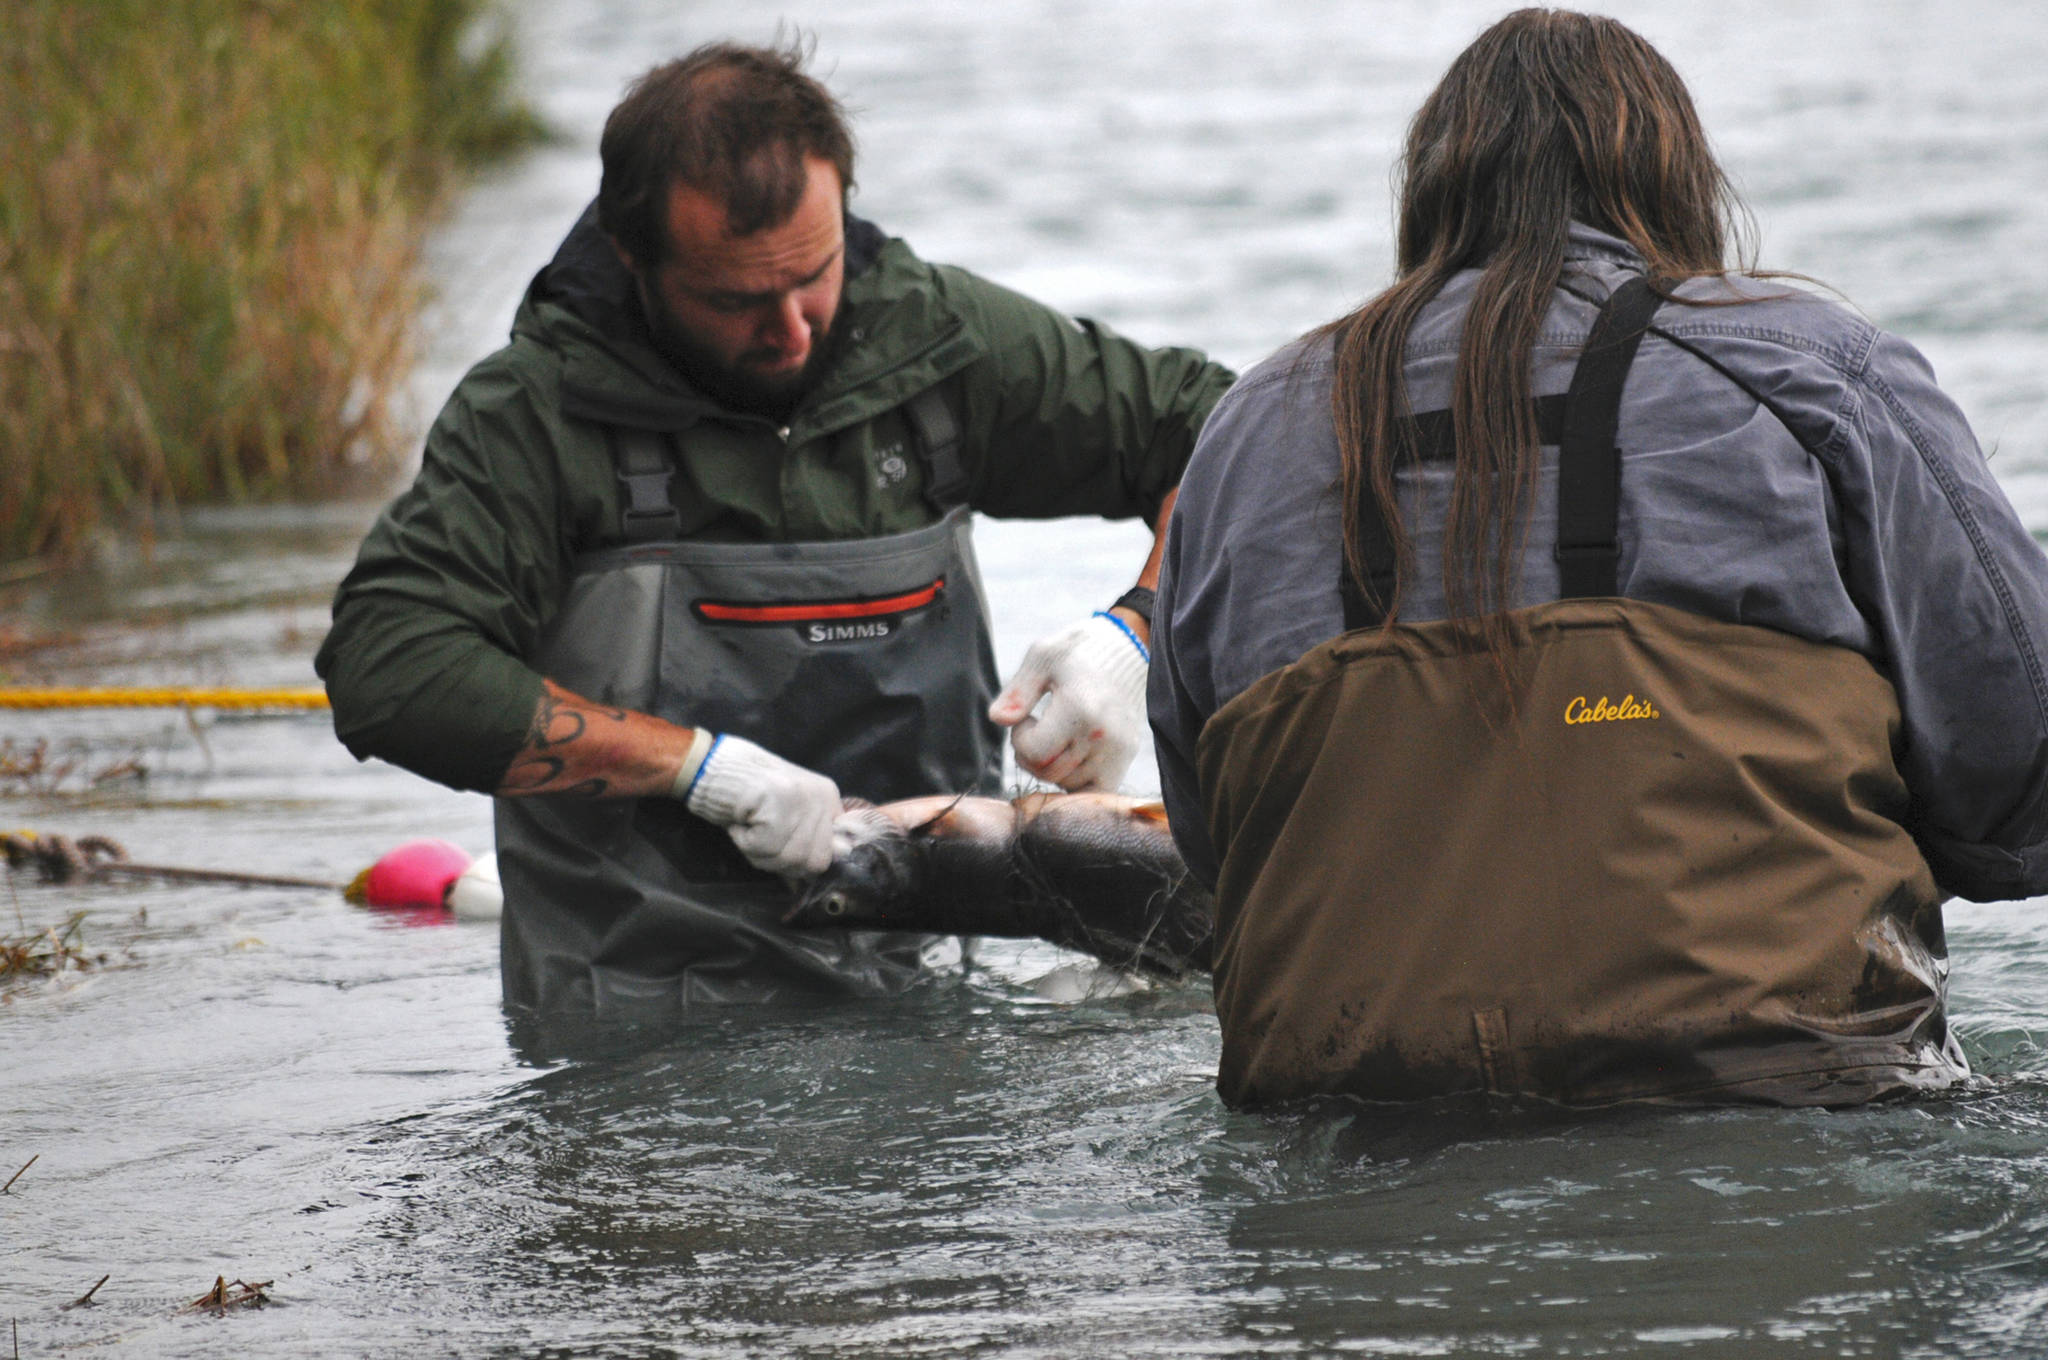 Ninilchik Traditional Council employees Daniel Reynolds (left) and Darryl Williams (right) remove a sockeye salmon from the tribe’s subsistence gillnet in the Kenai River in August 2016 near Soldotna, Alaska. The tribe first fished its subsistence gillnet, for which all rural residents of Ninilchik are qualified, in 2016 and completed its second season in September 2017. (Photo by Elizabeth Earl/Peninsula Clarion, file)